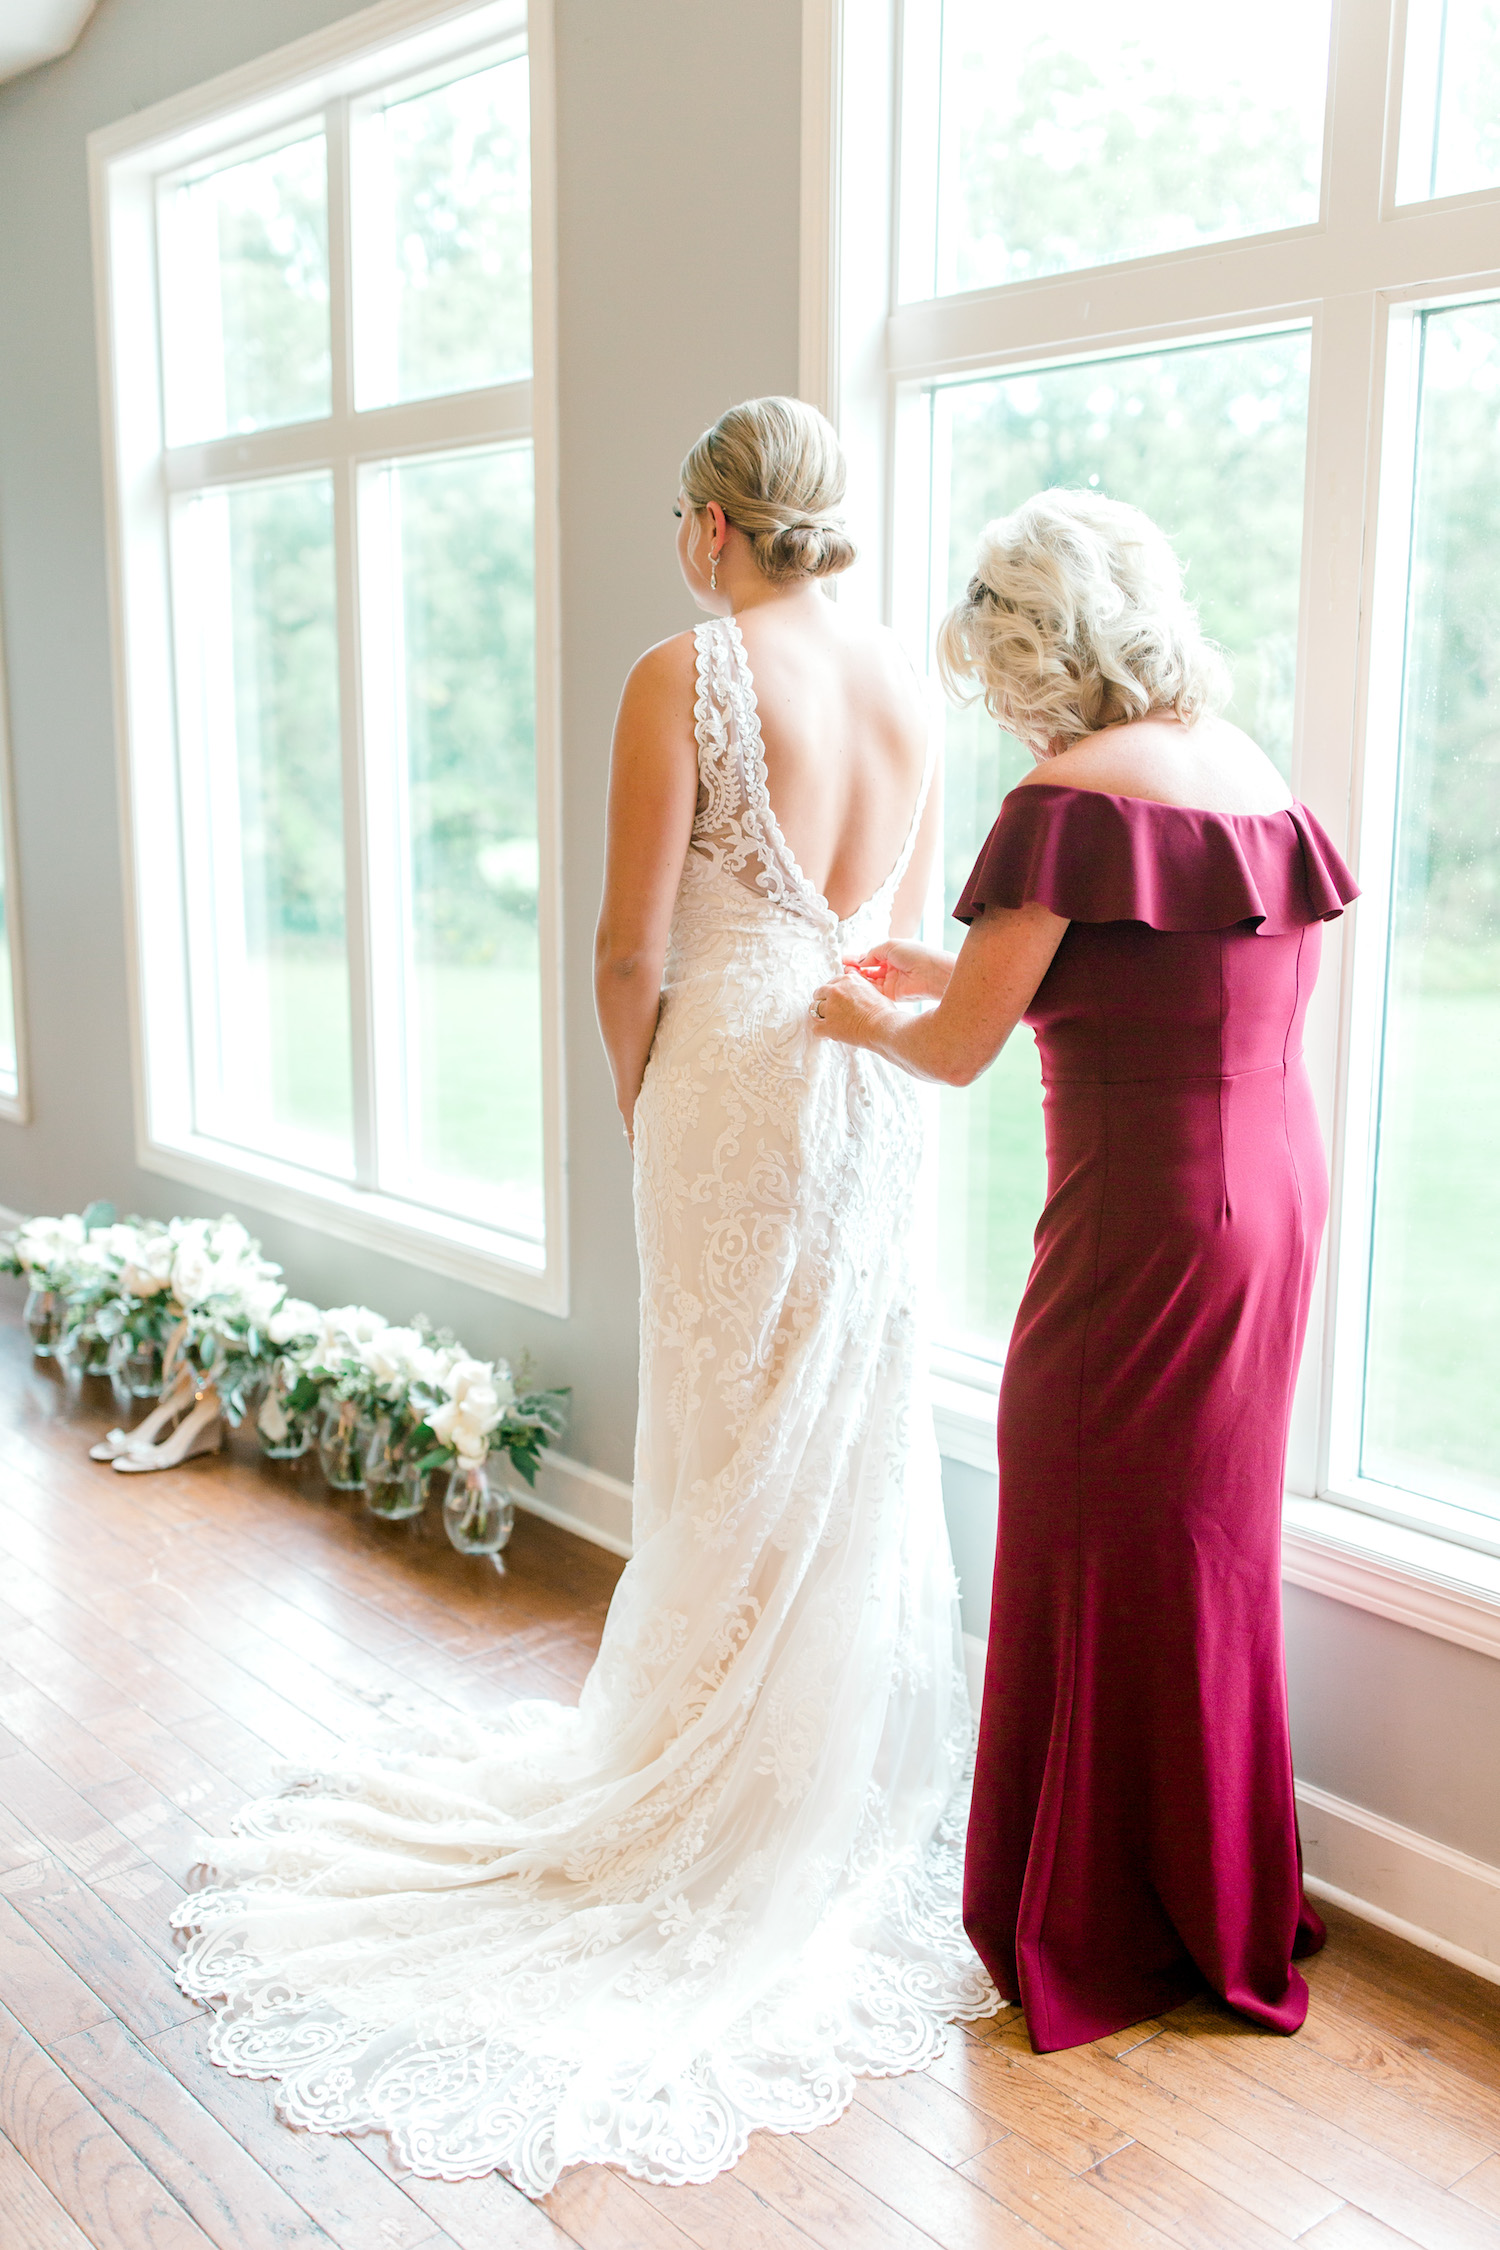 Mother of bride buttoning brides gown